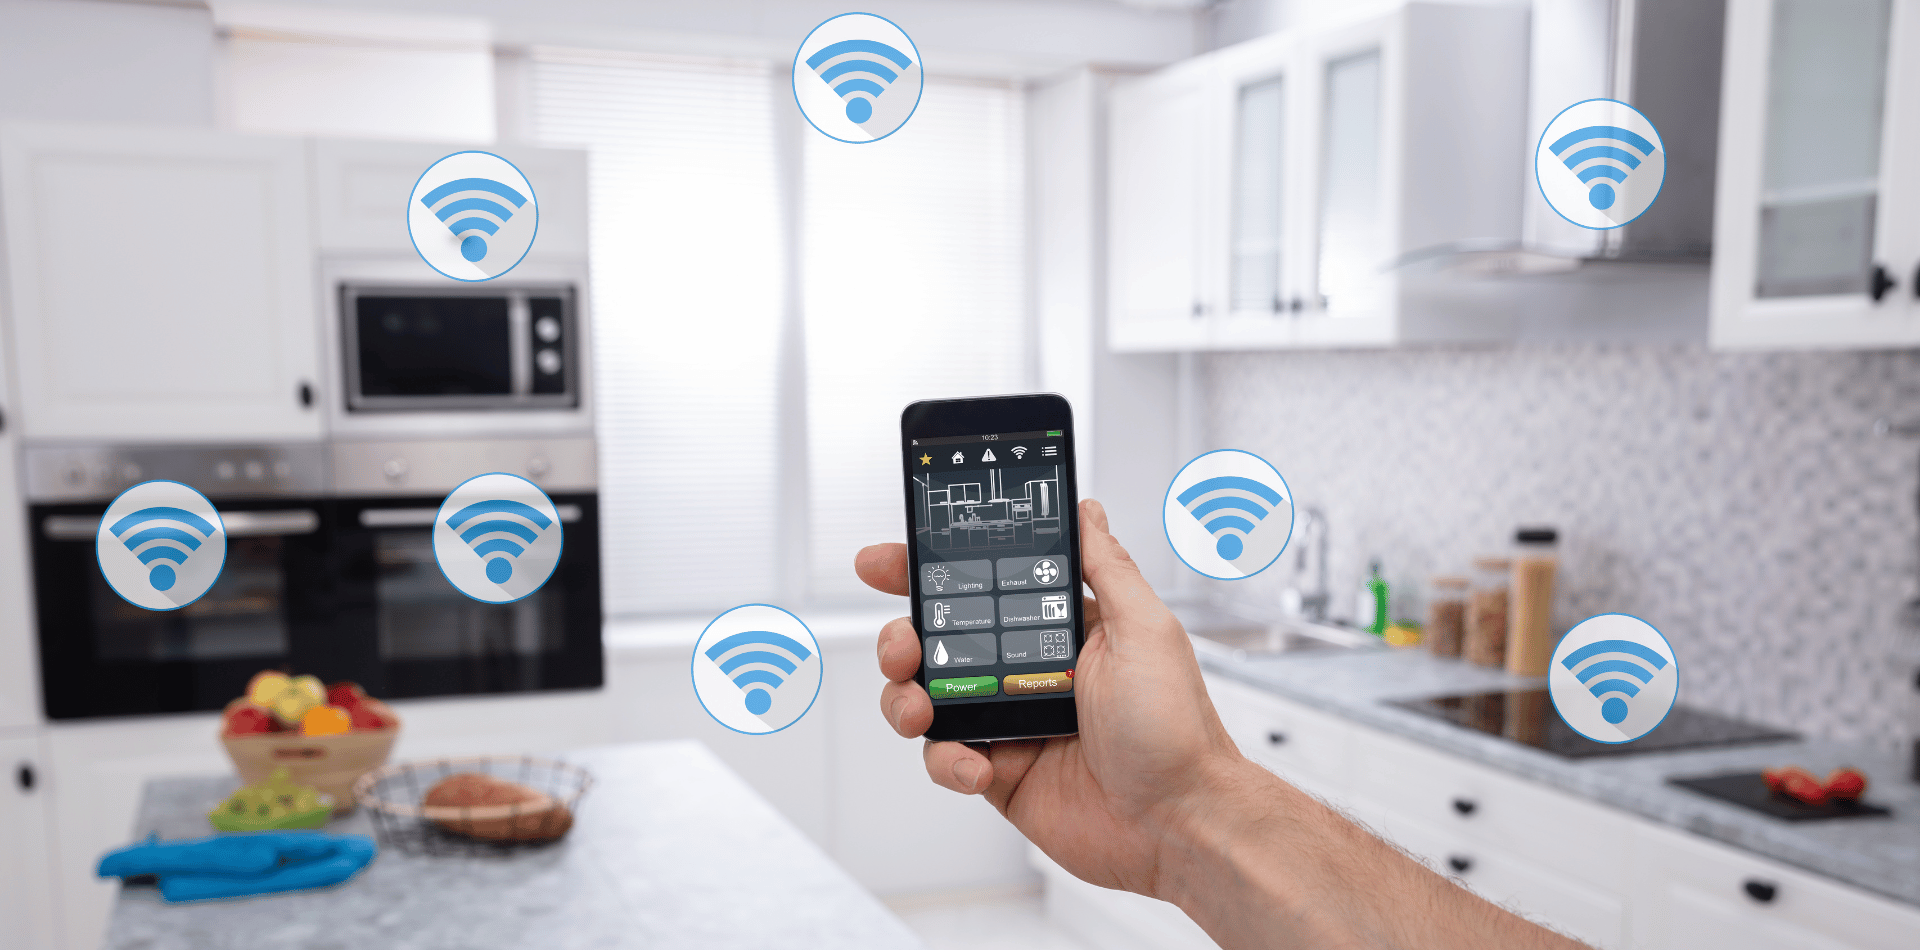 Controlling smart technology in a home